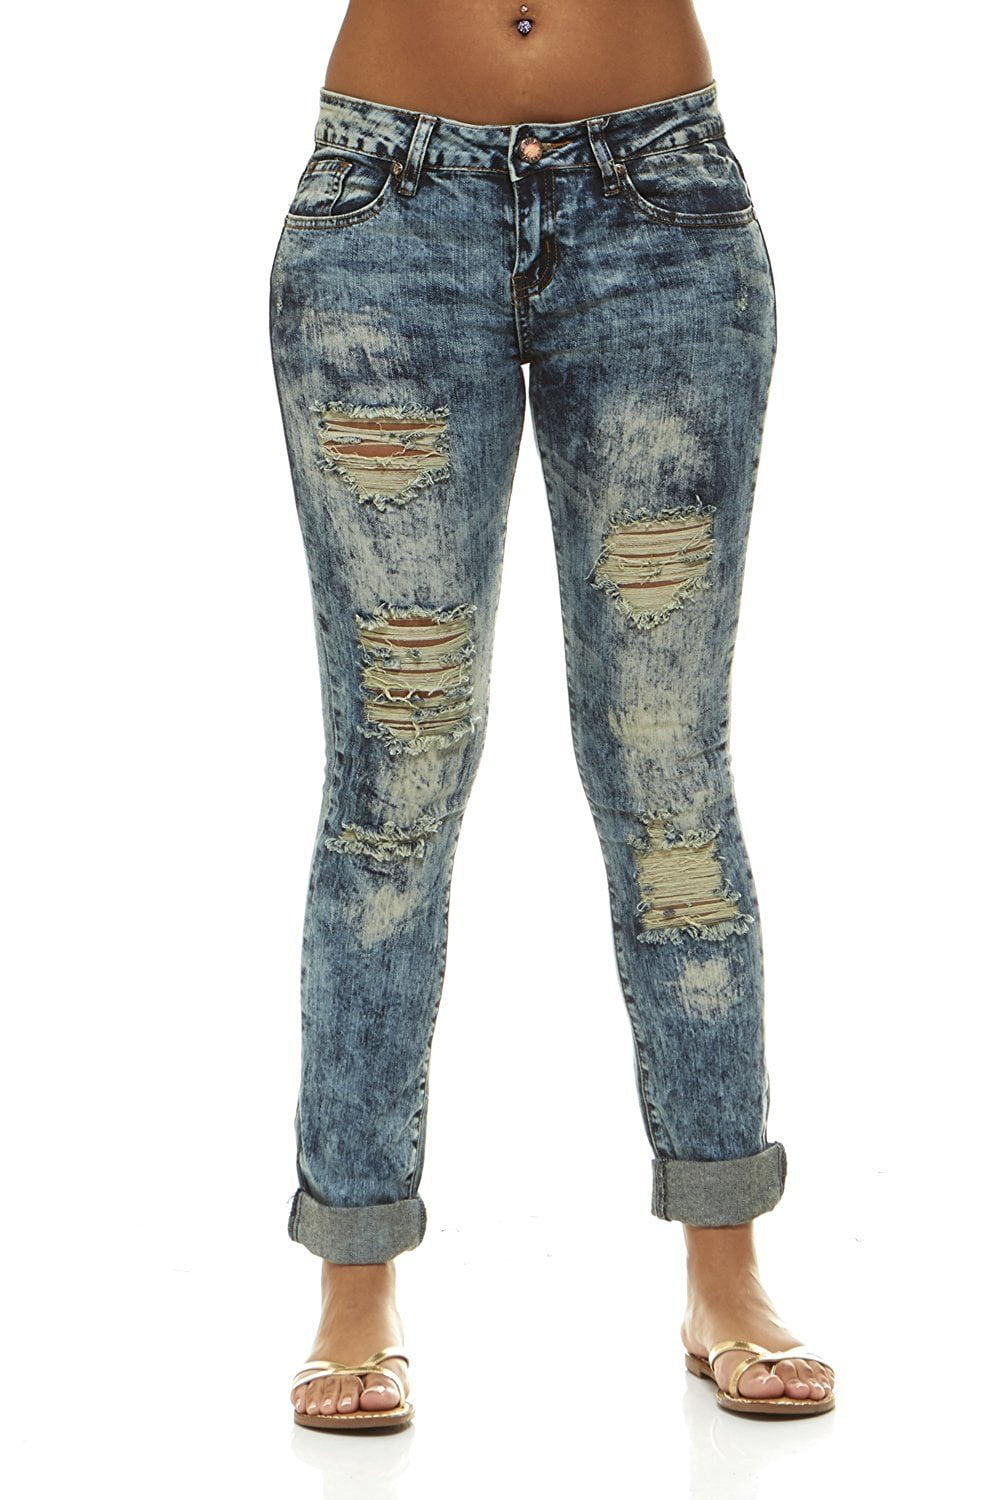 VIP Jeans Juniors Bleach Acid Washed Ripped at Knee Skinny Jeans for ...